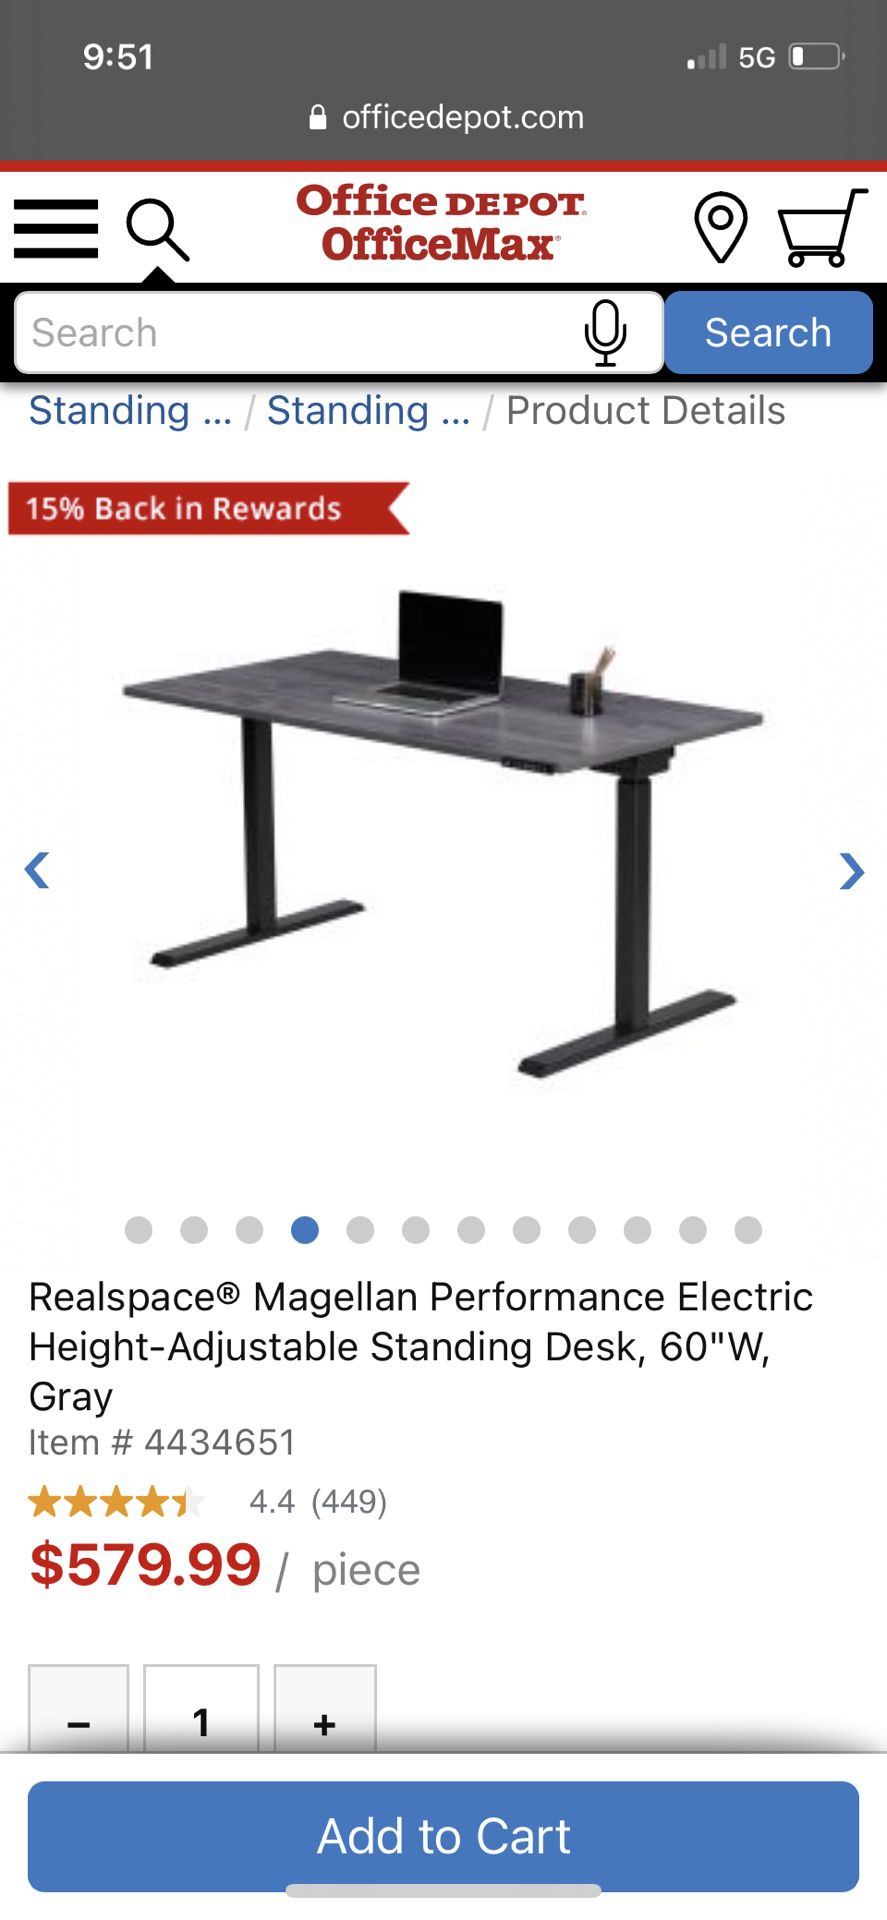 Realspace Magellan Performance Electric Height-Adjustable Standing Desk, 60"W, Gray